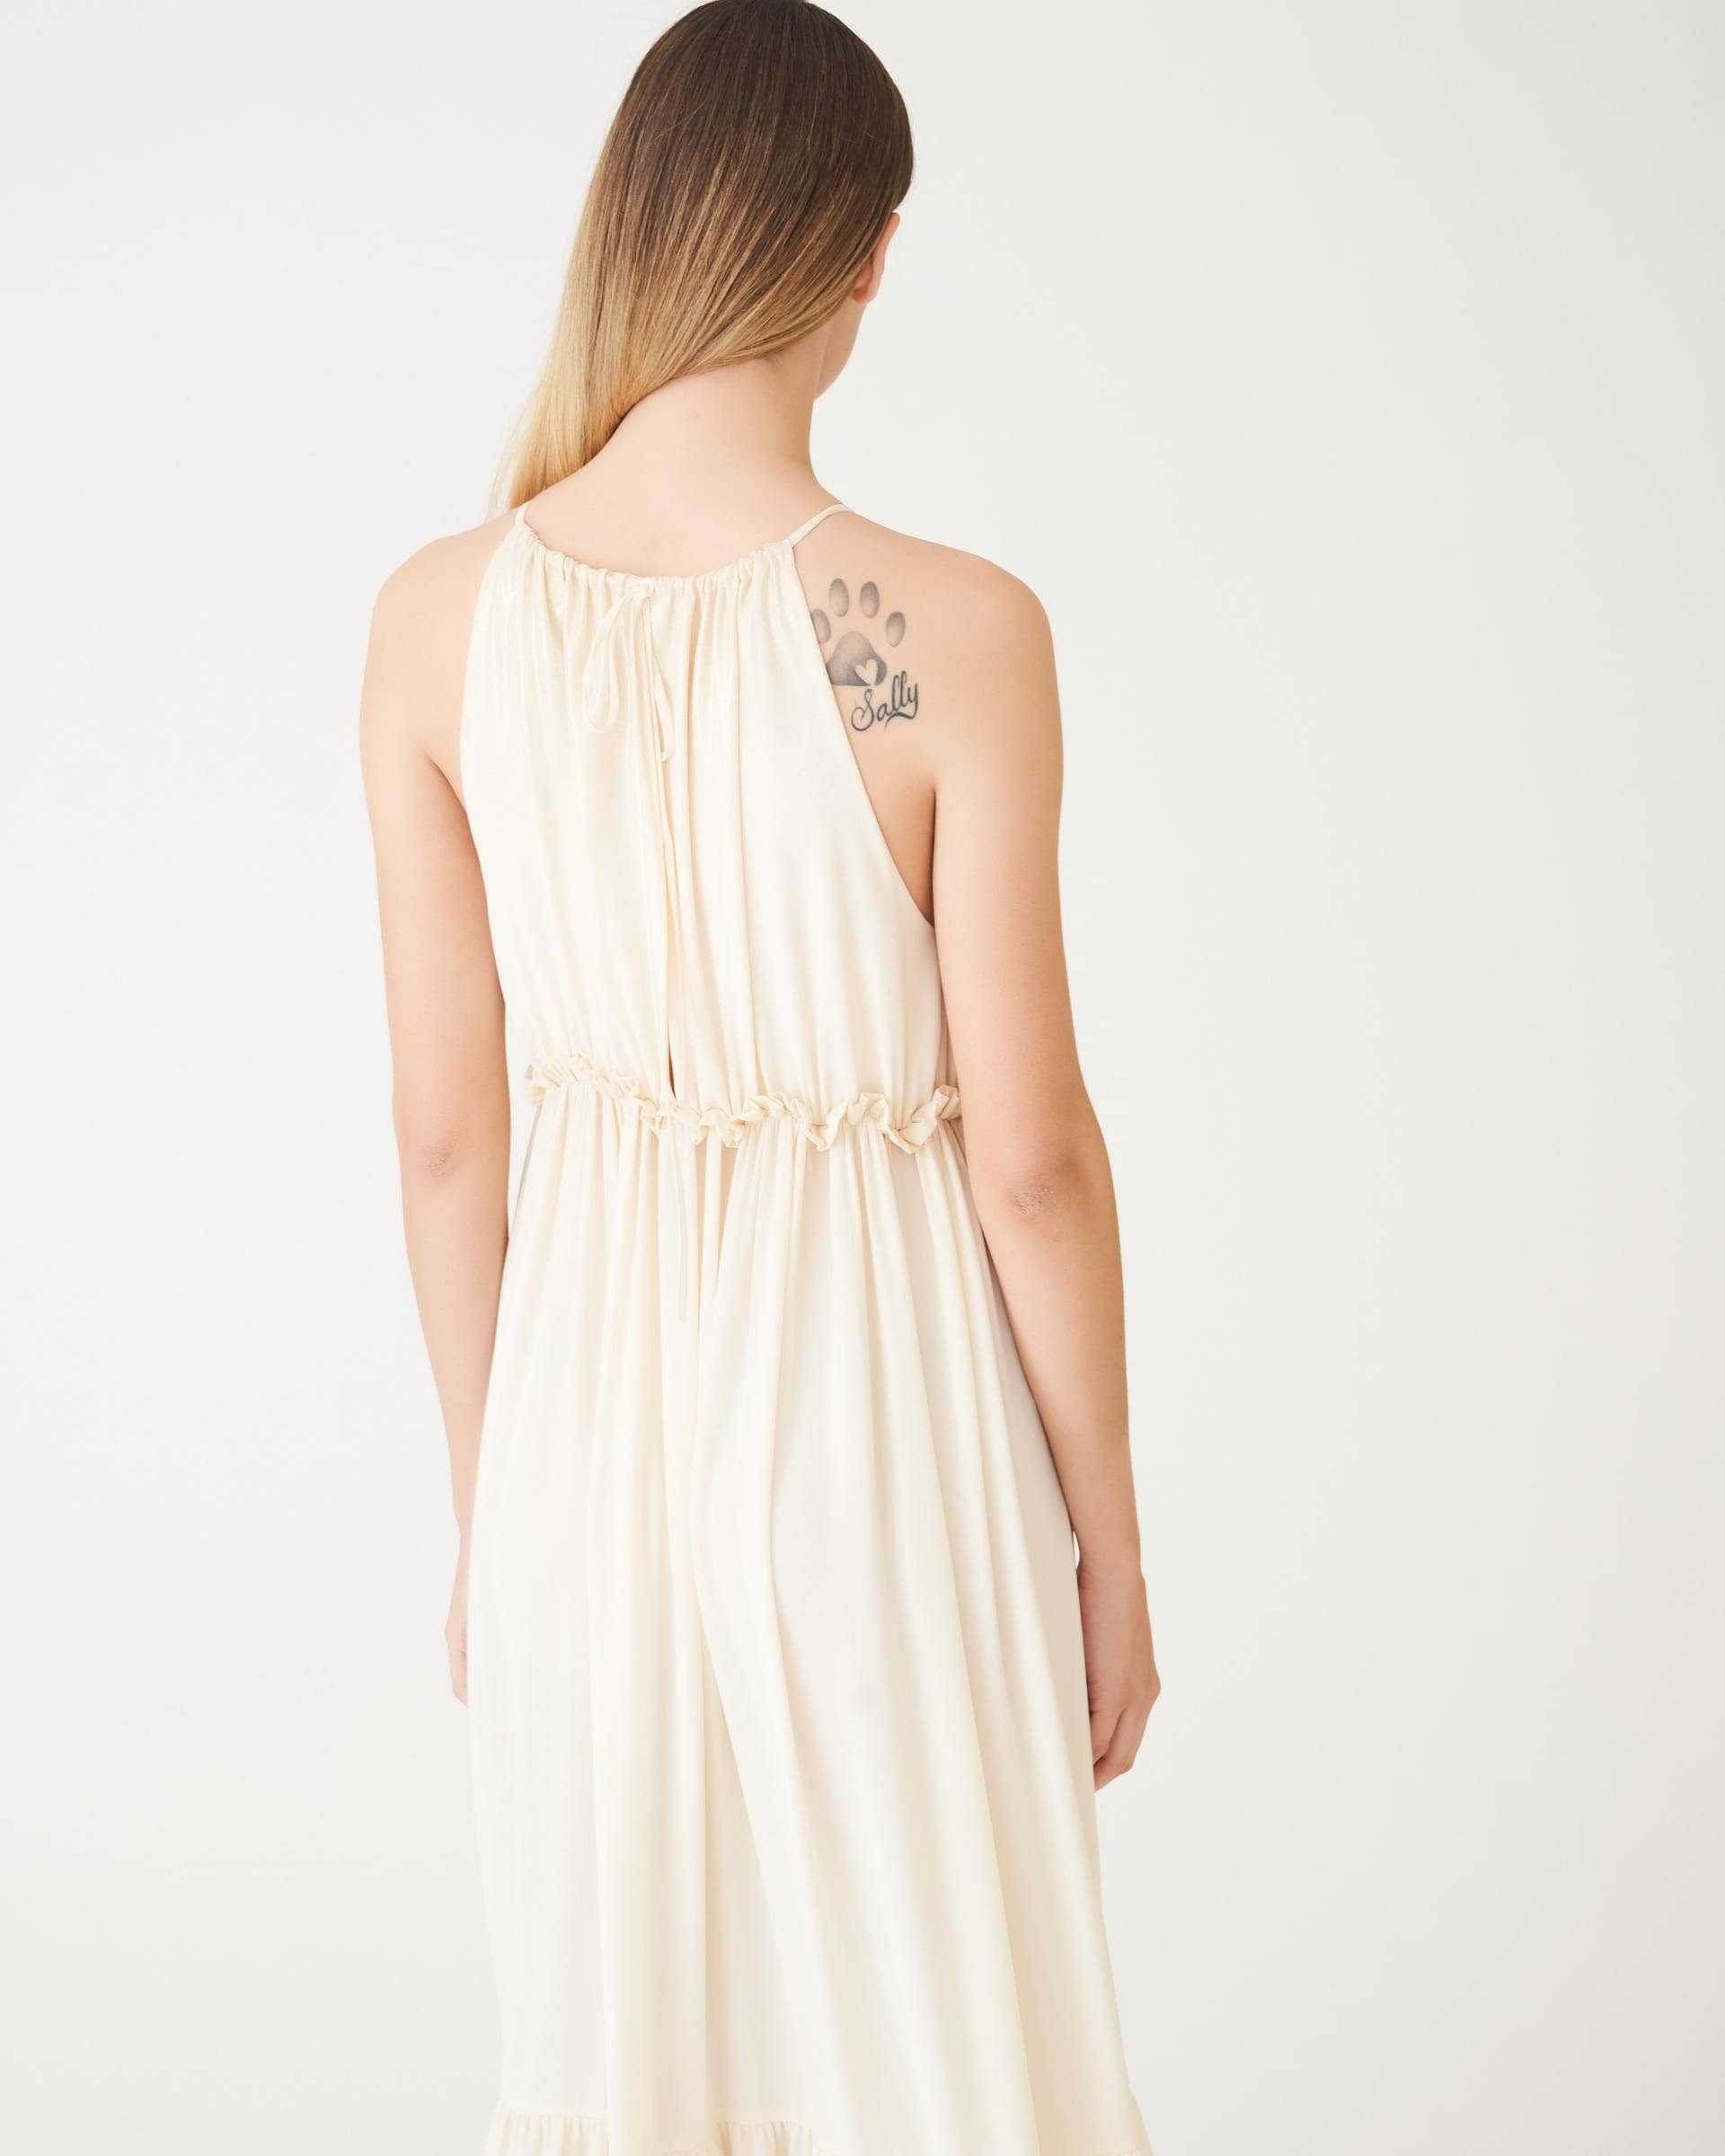 The Market Store | Long Dress With Curled And Ruffles